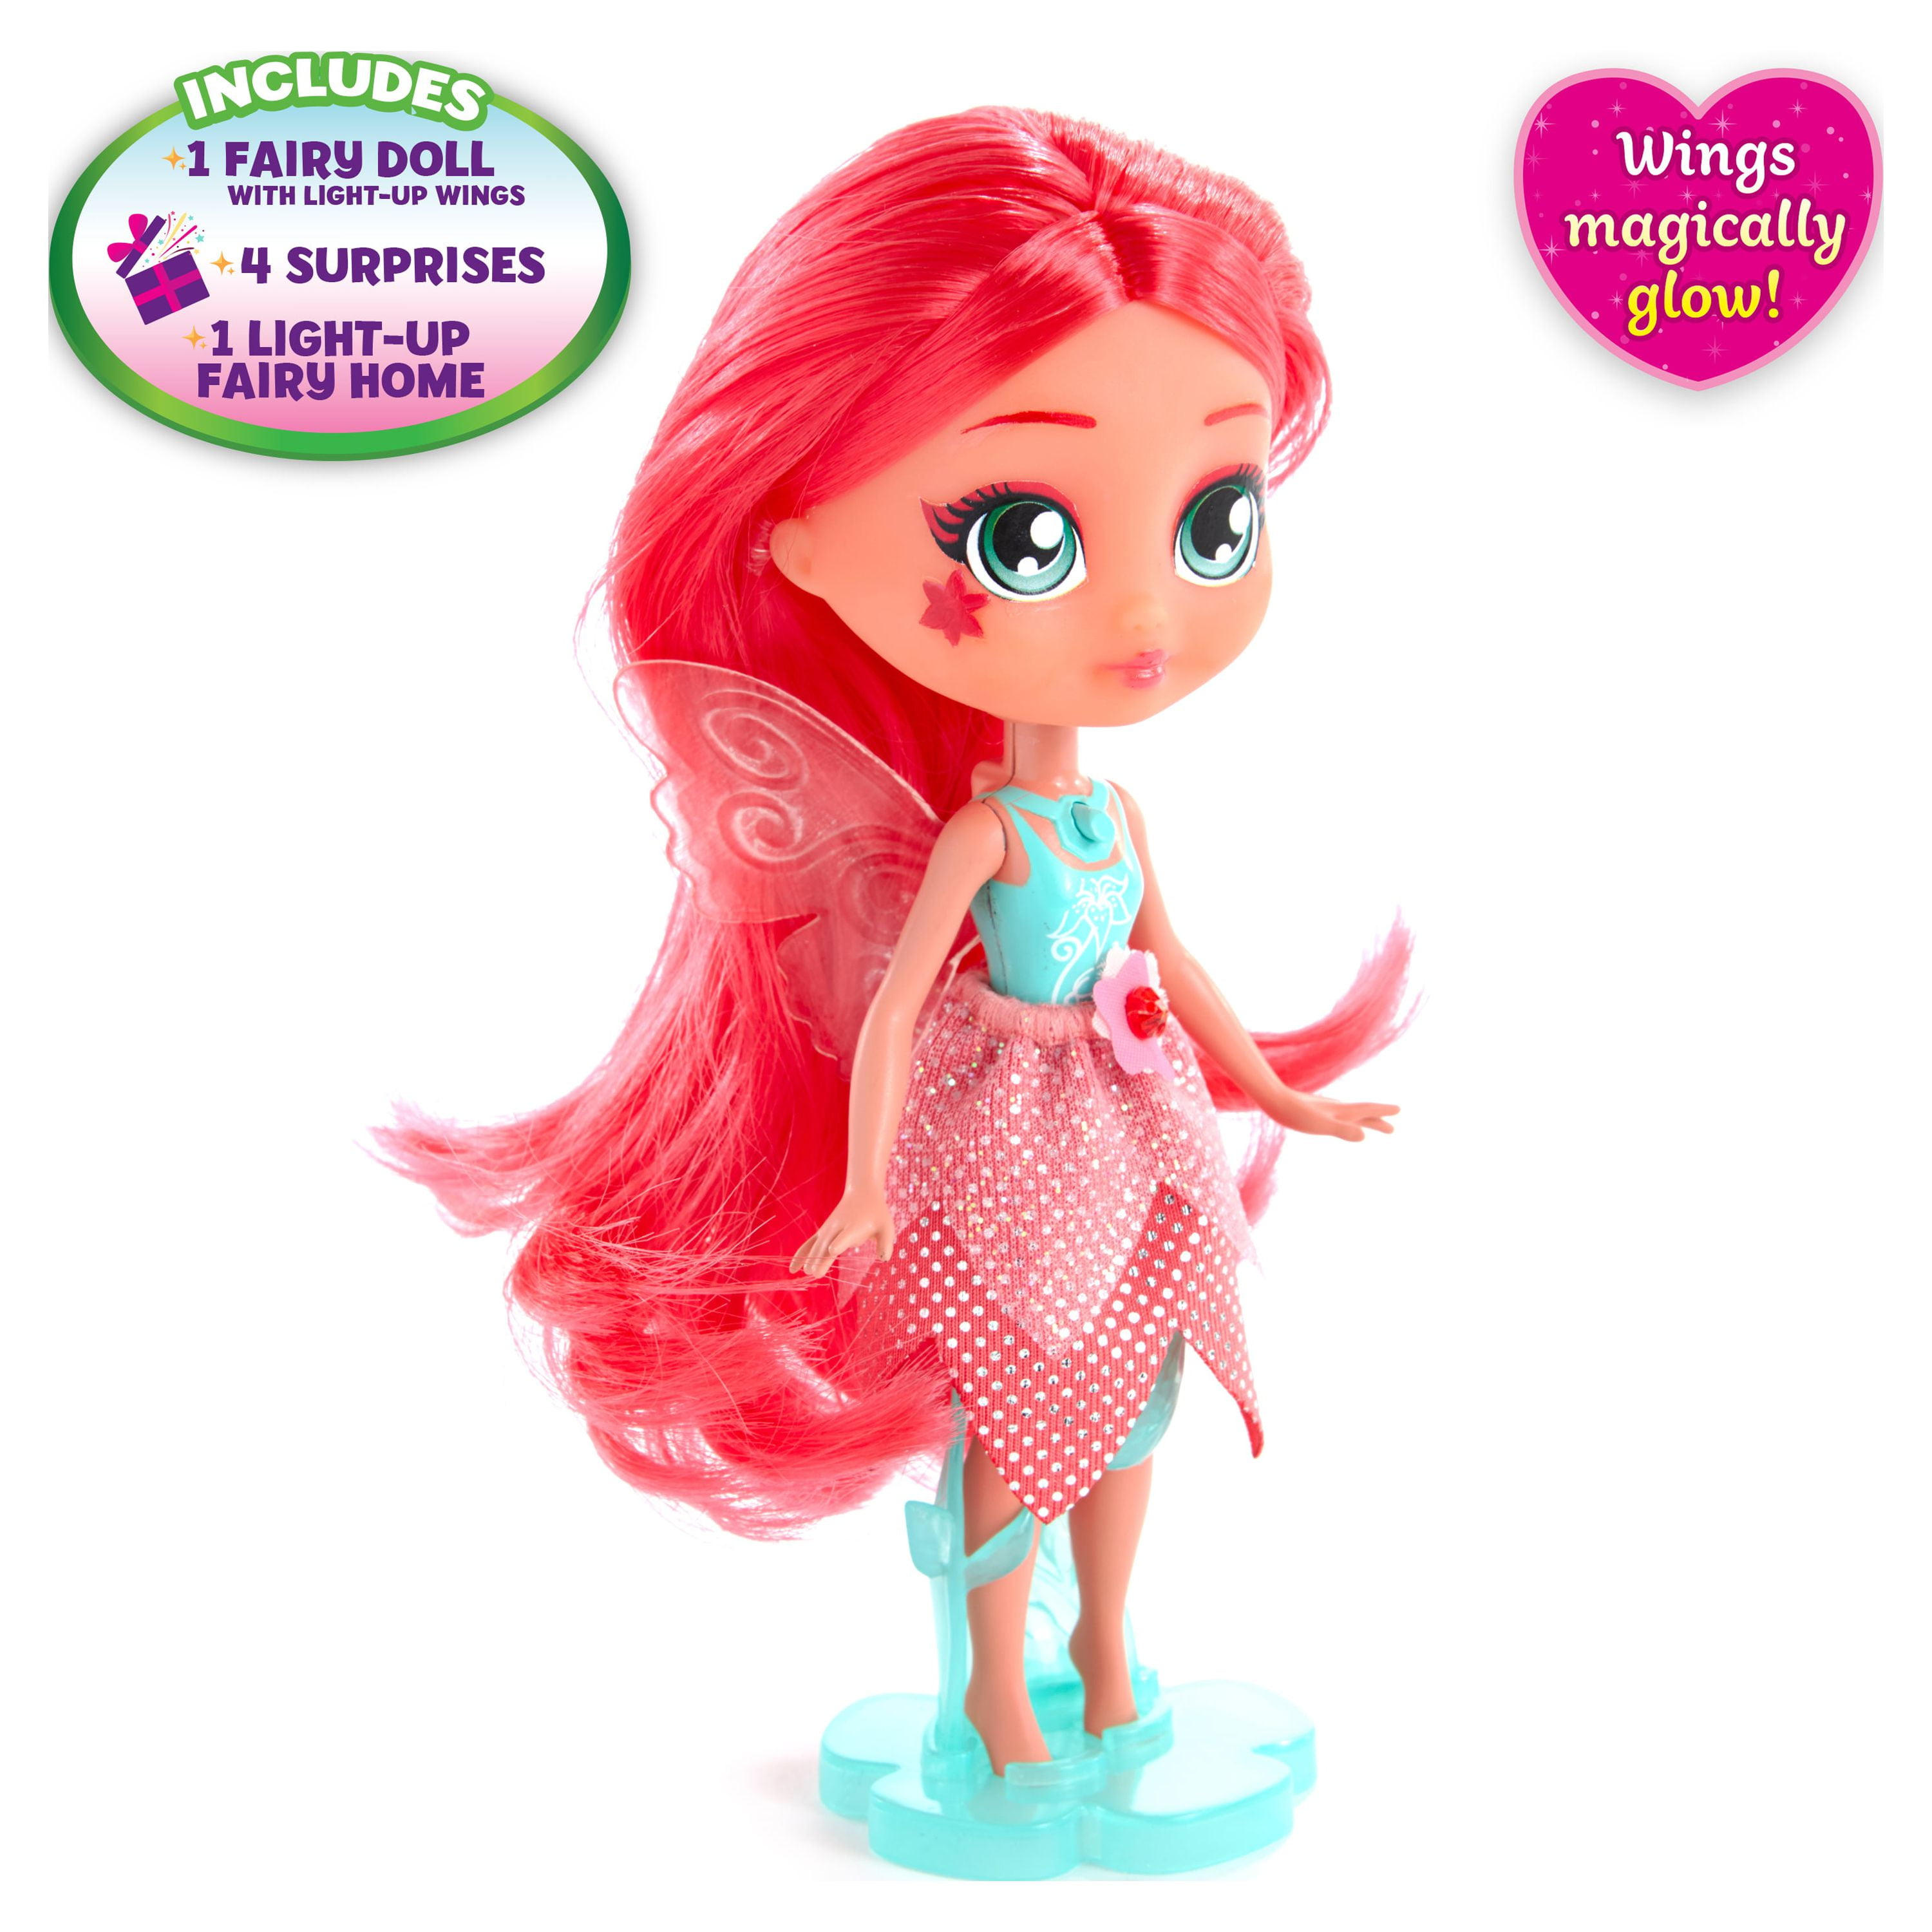 BFF Bright Fairy Friends Dolls from Funrise - Styles May Vary